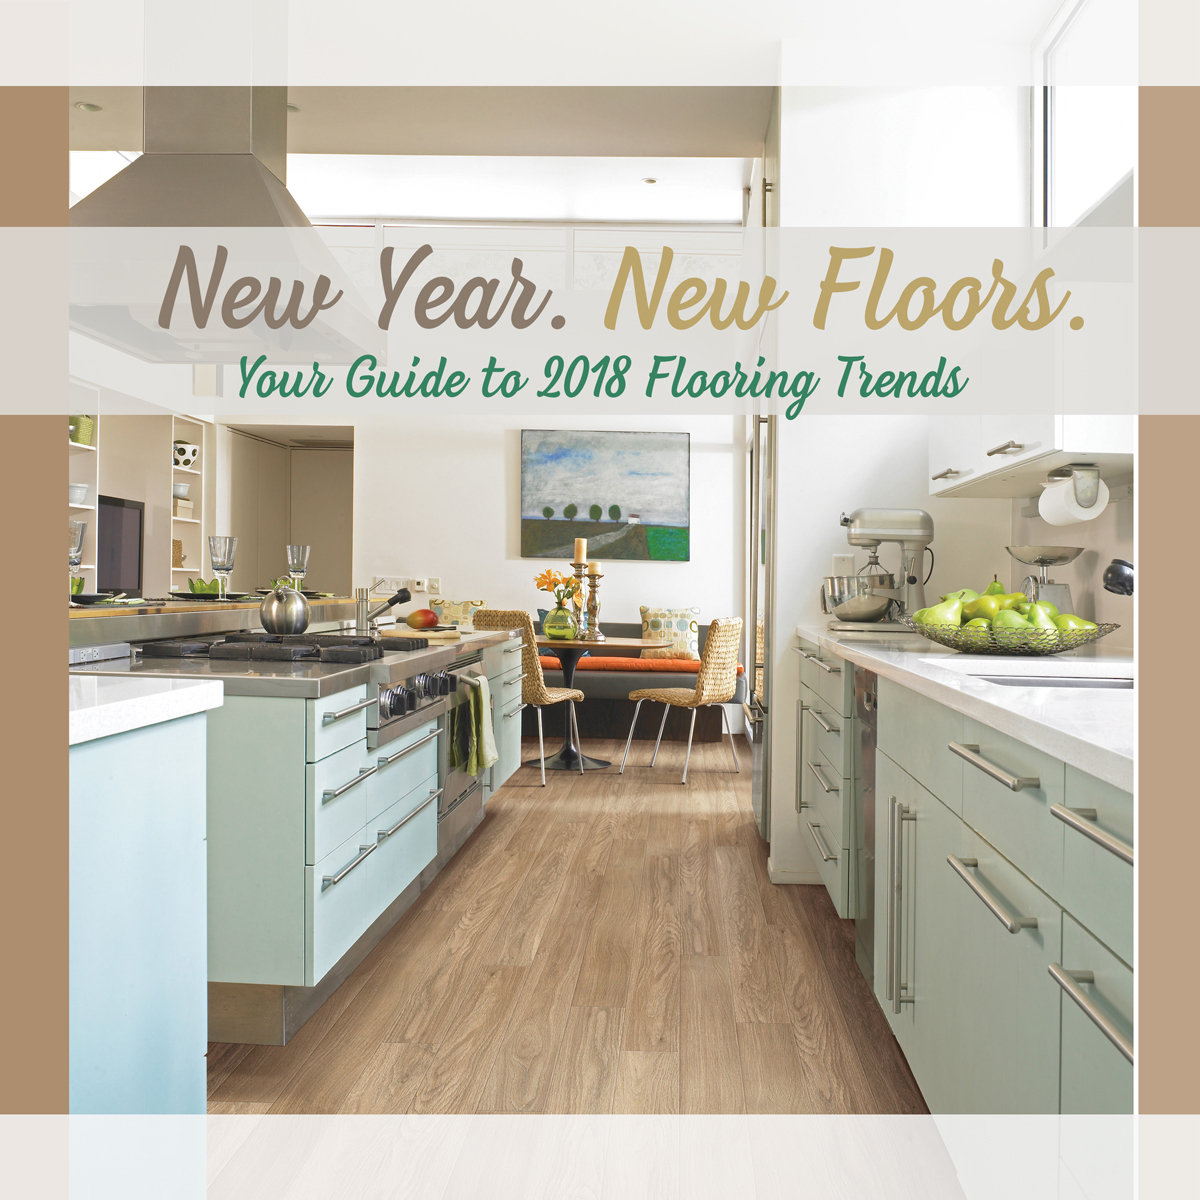 Your GUide to 2018 Flooring Trends